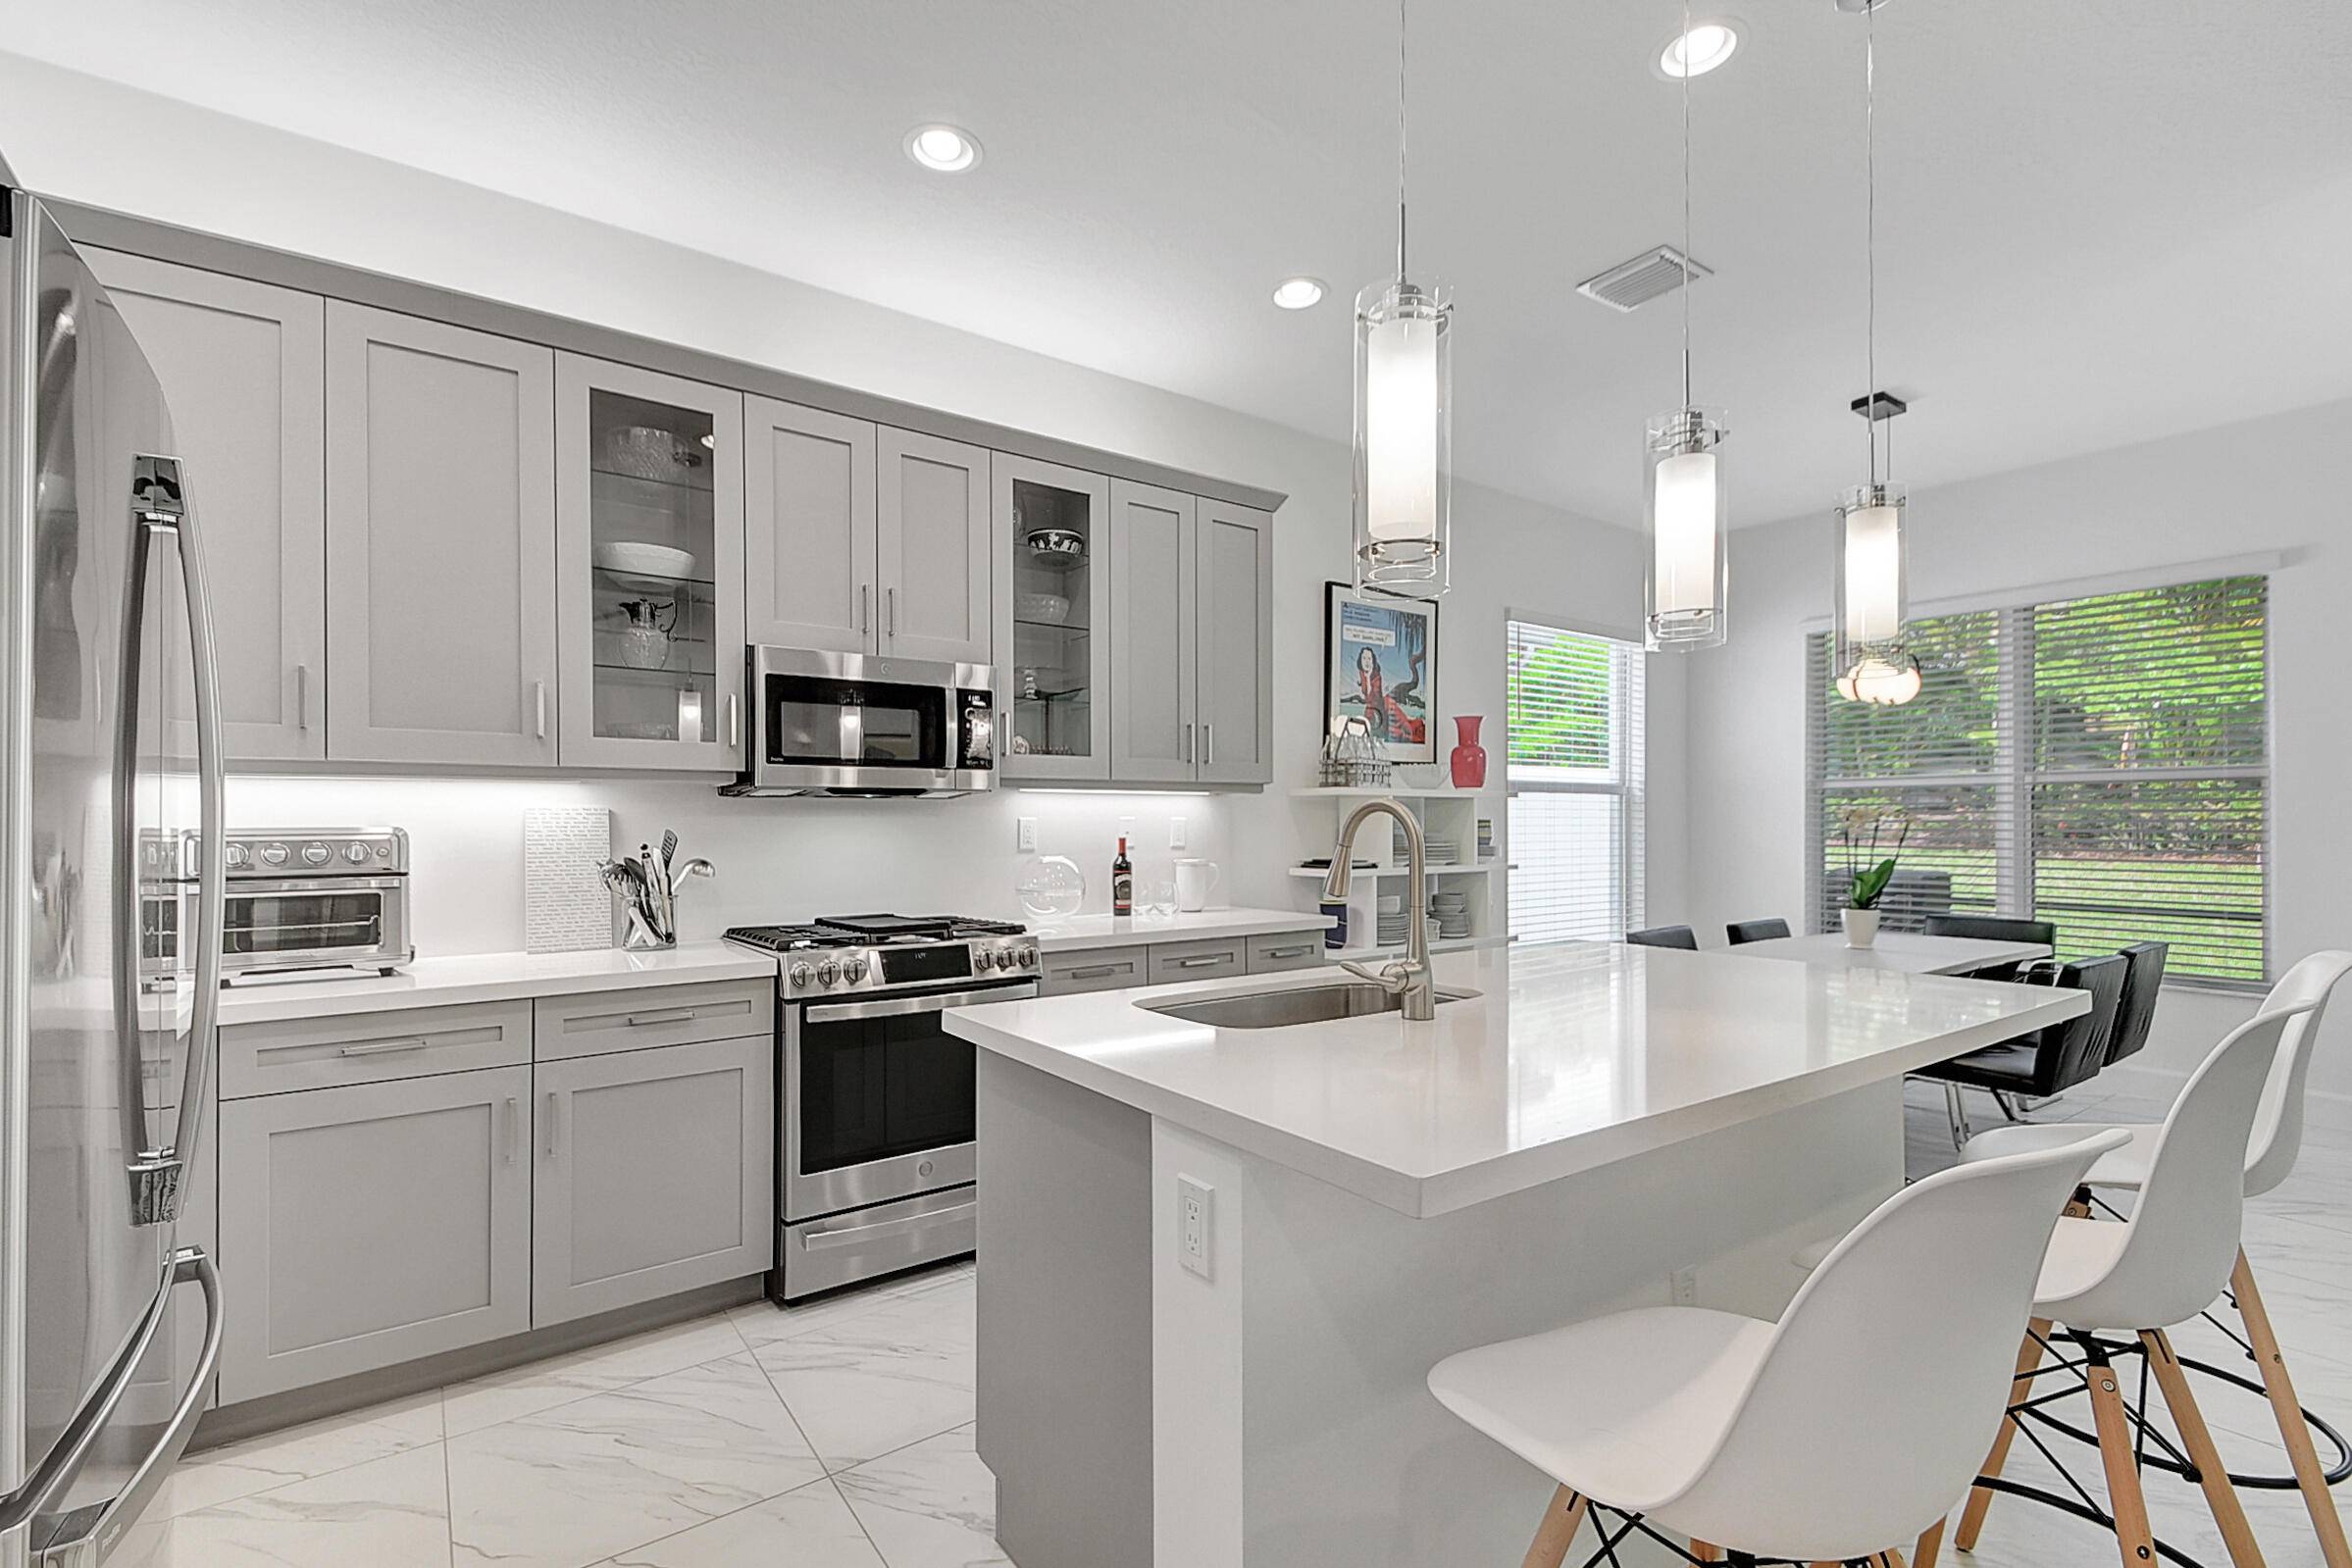 Welcome to your nearly new dream home in Valencia Sound, the latest gem in GL Homes Boynton Beach's coveted real estate landscape.